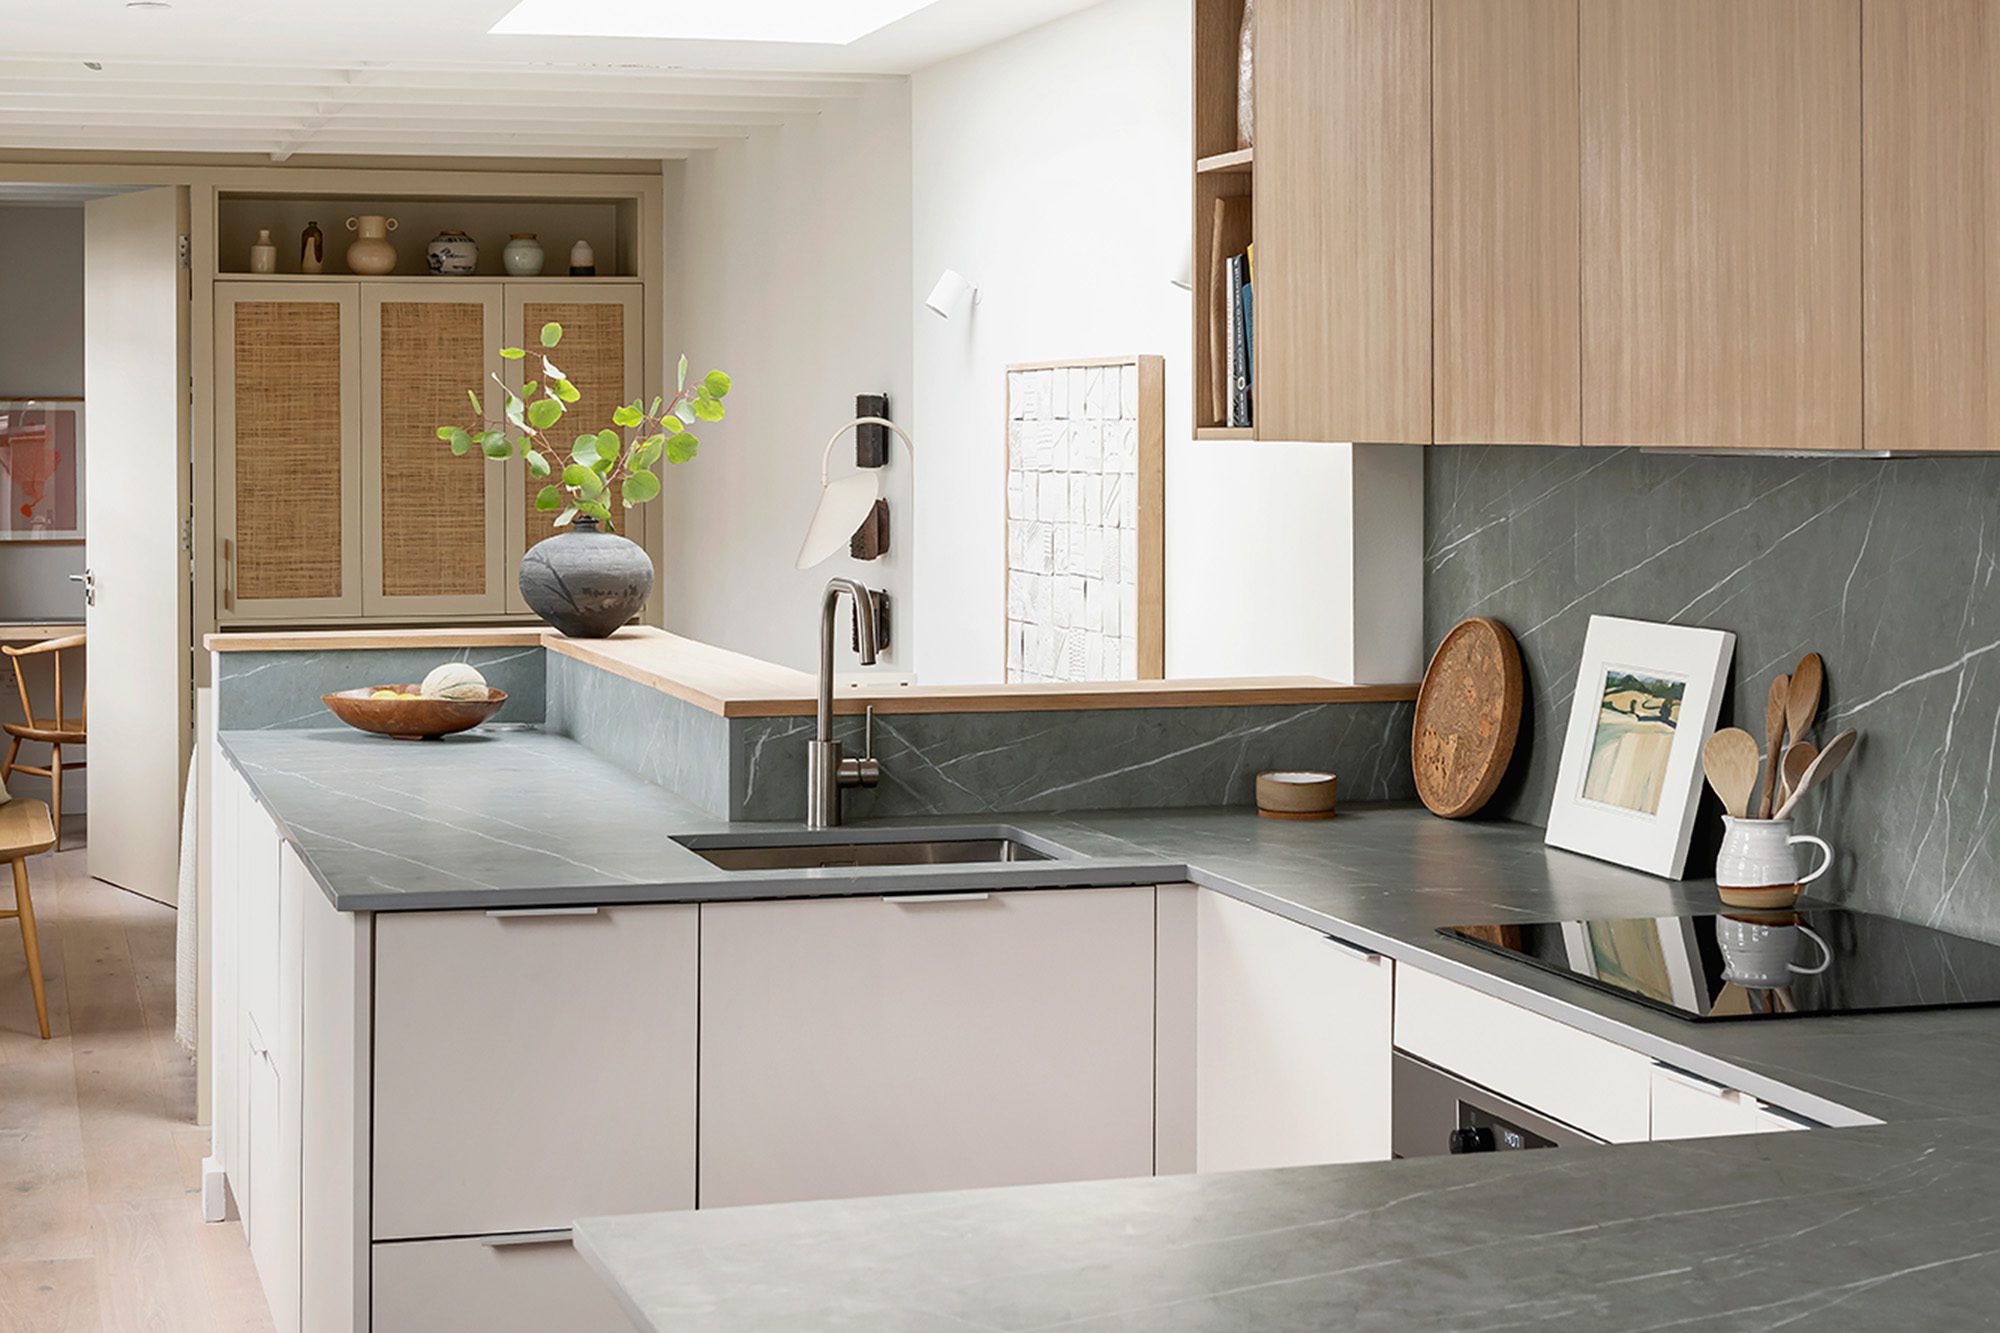 Husk's Old Pottery Kitchen, featuring Natura HPL Grigio Viola fronts and grey marble worktops.